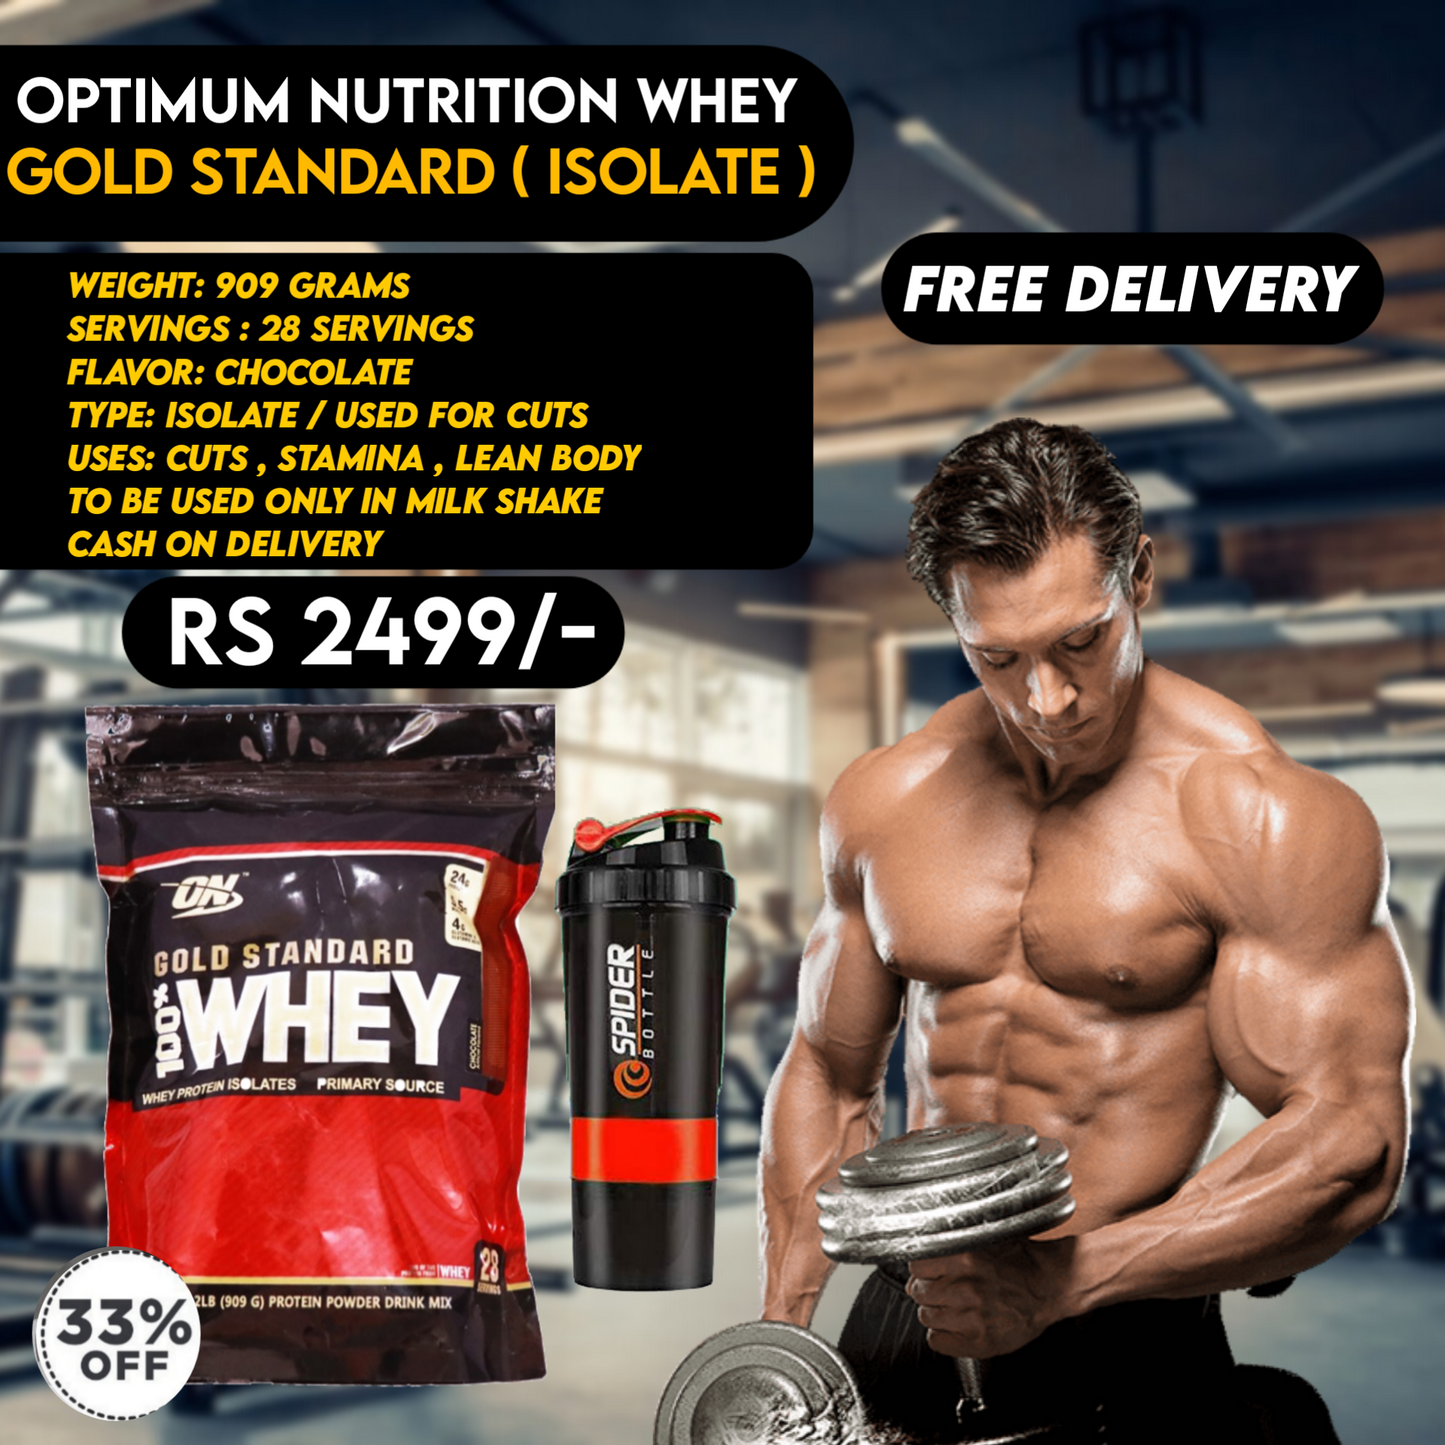 Optimum Nutrition On Gold Standard whey 2 lbs chocolate flavor Made in pakistan